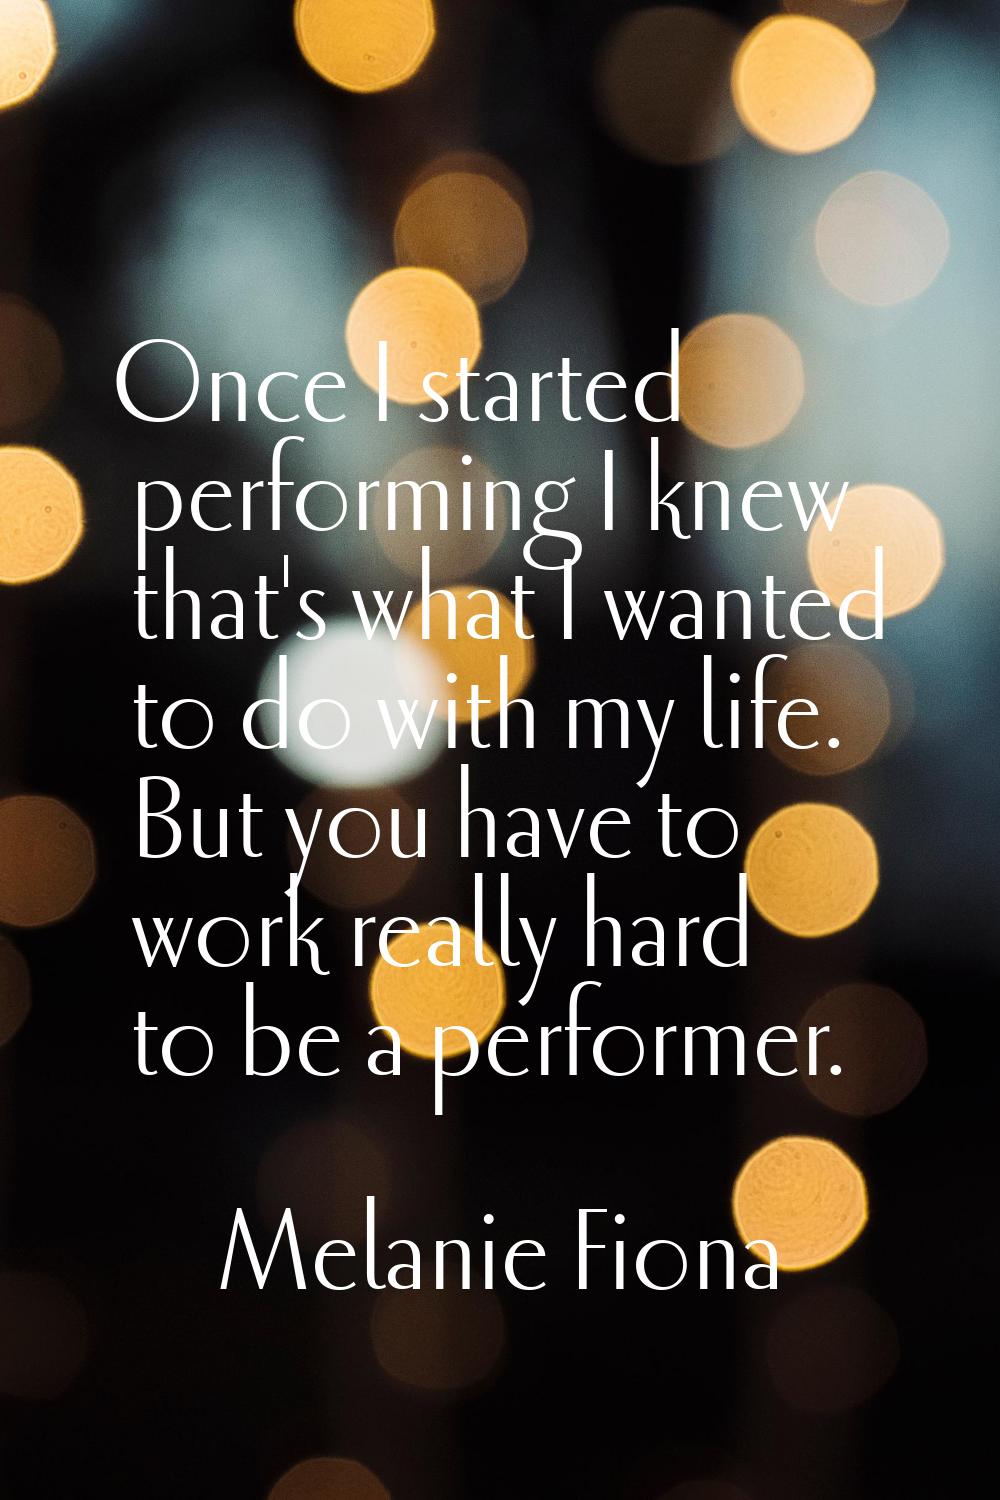 Once I started performing I knew that's what I wanted to do with my life. But you have to work real